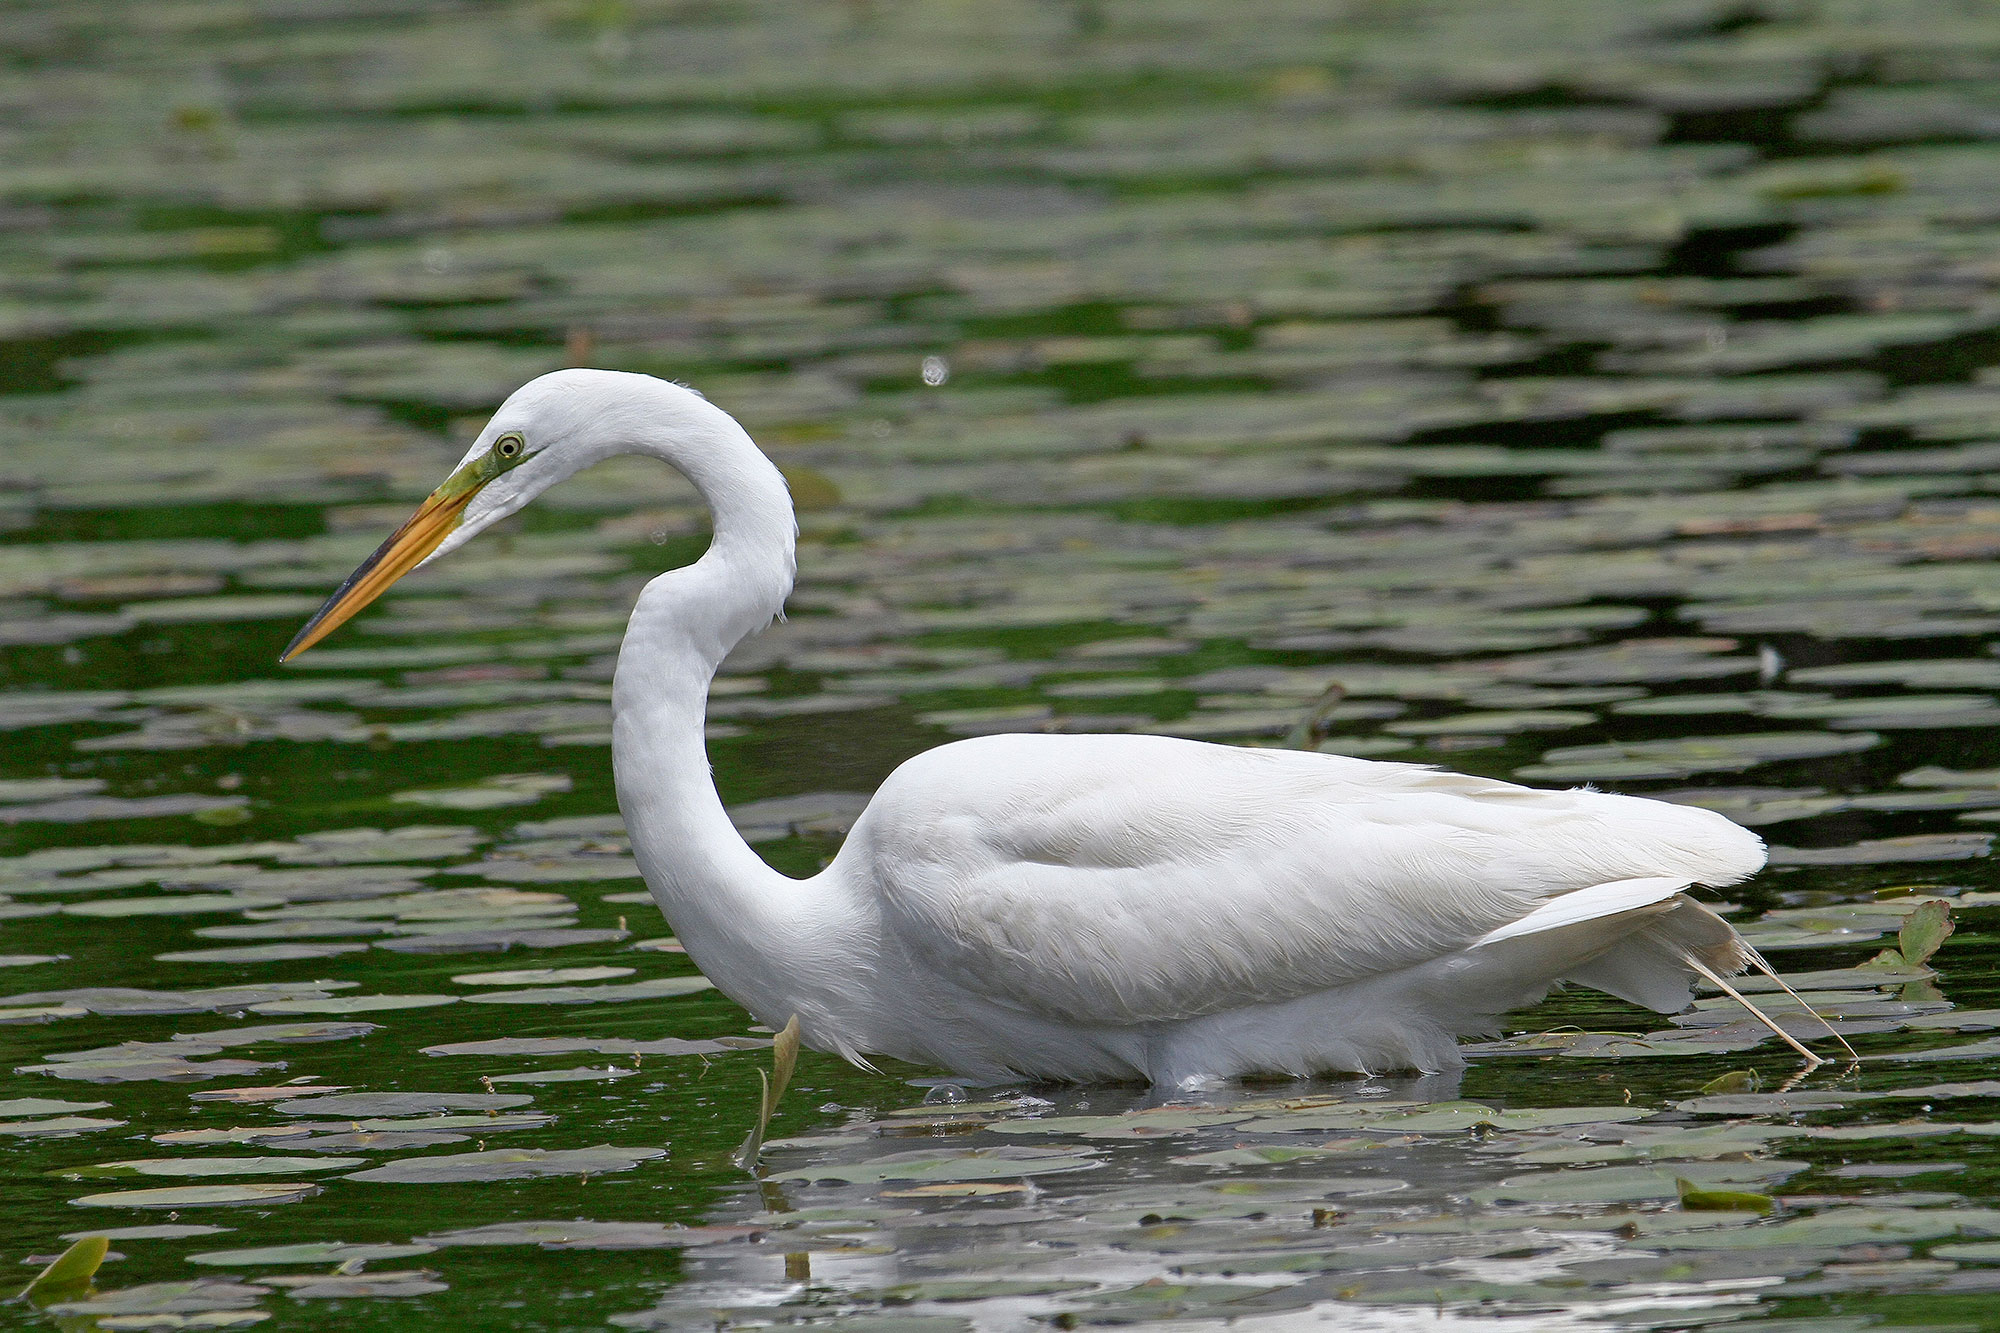 A great egret in water.